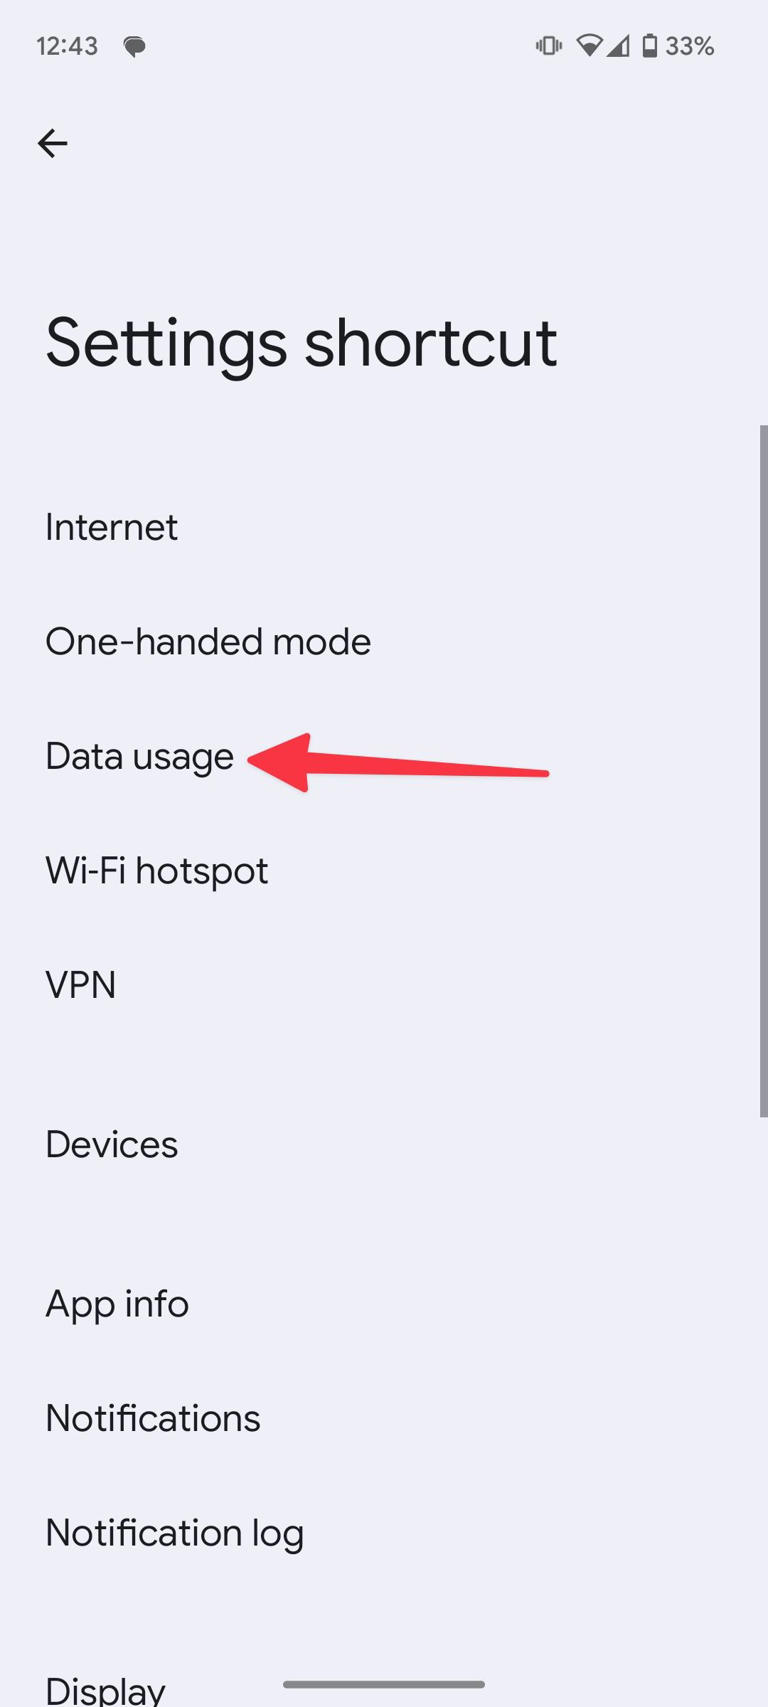 red solid arrow pointing to Data usage in settings shortcut on Android